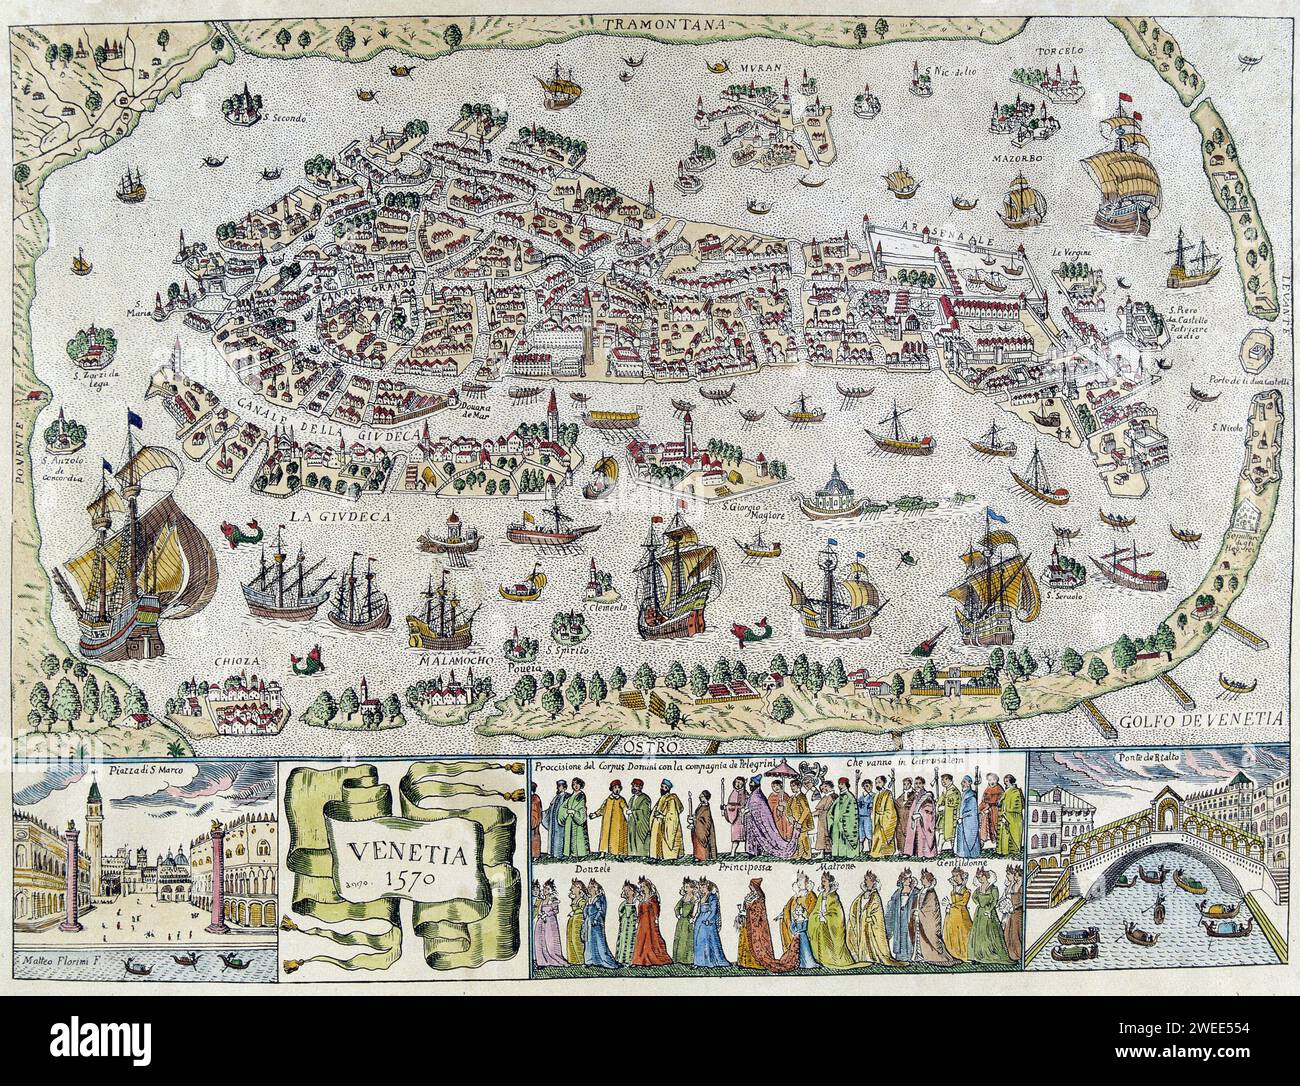 Map of Venice in 1570. Stock Photo